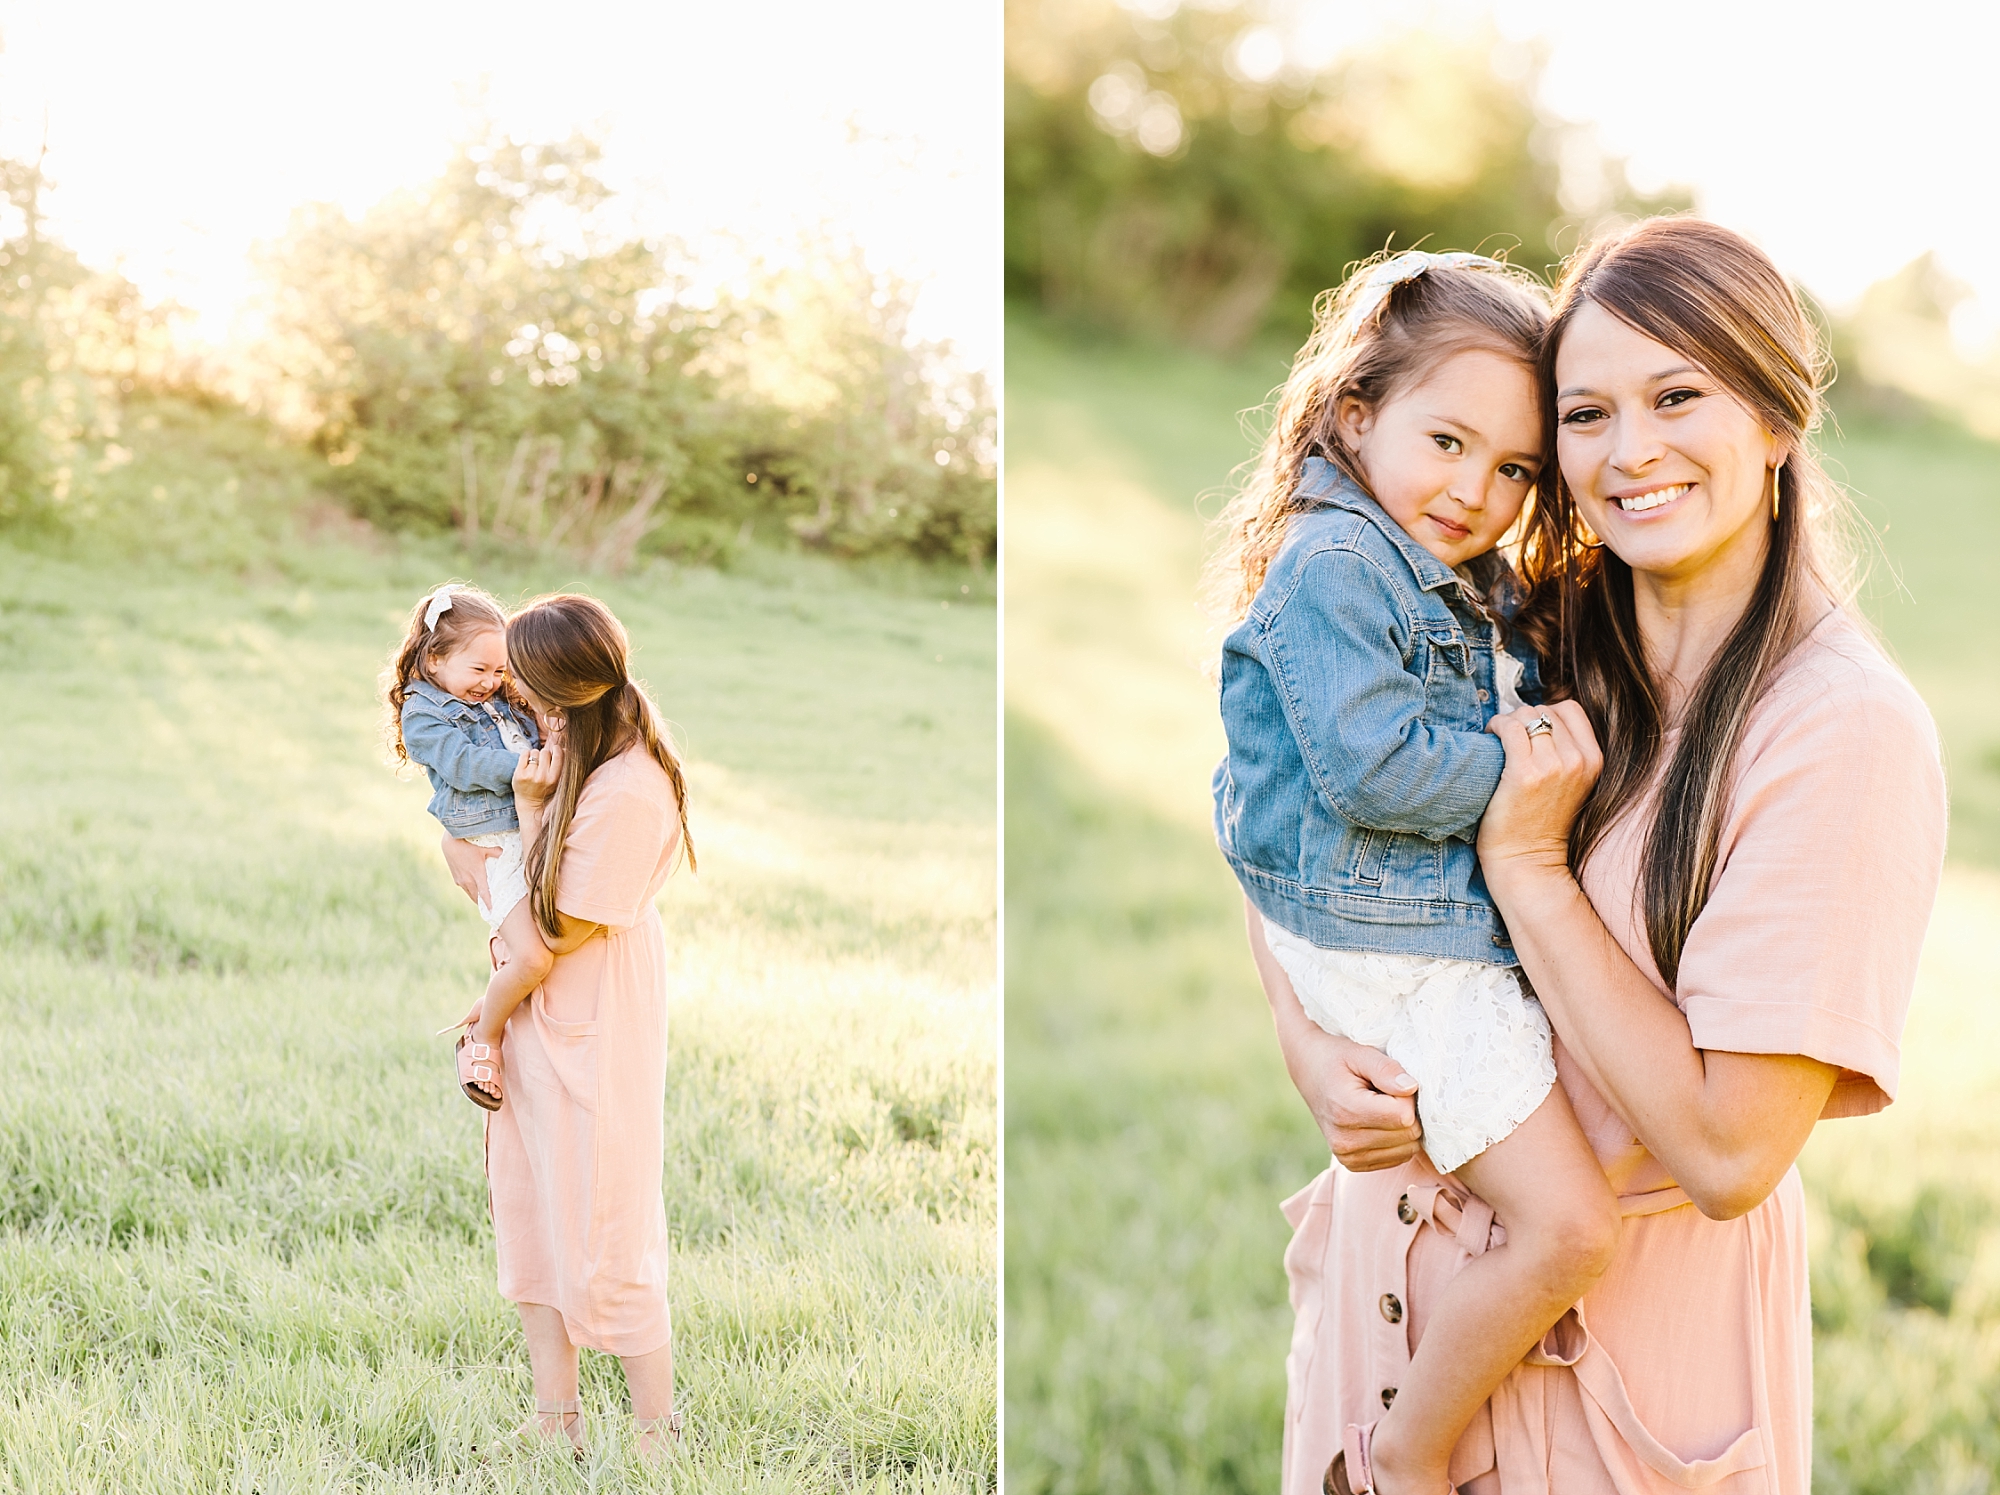 Mommy and daughter photos